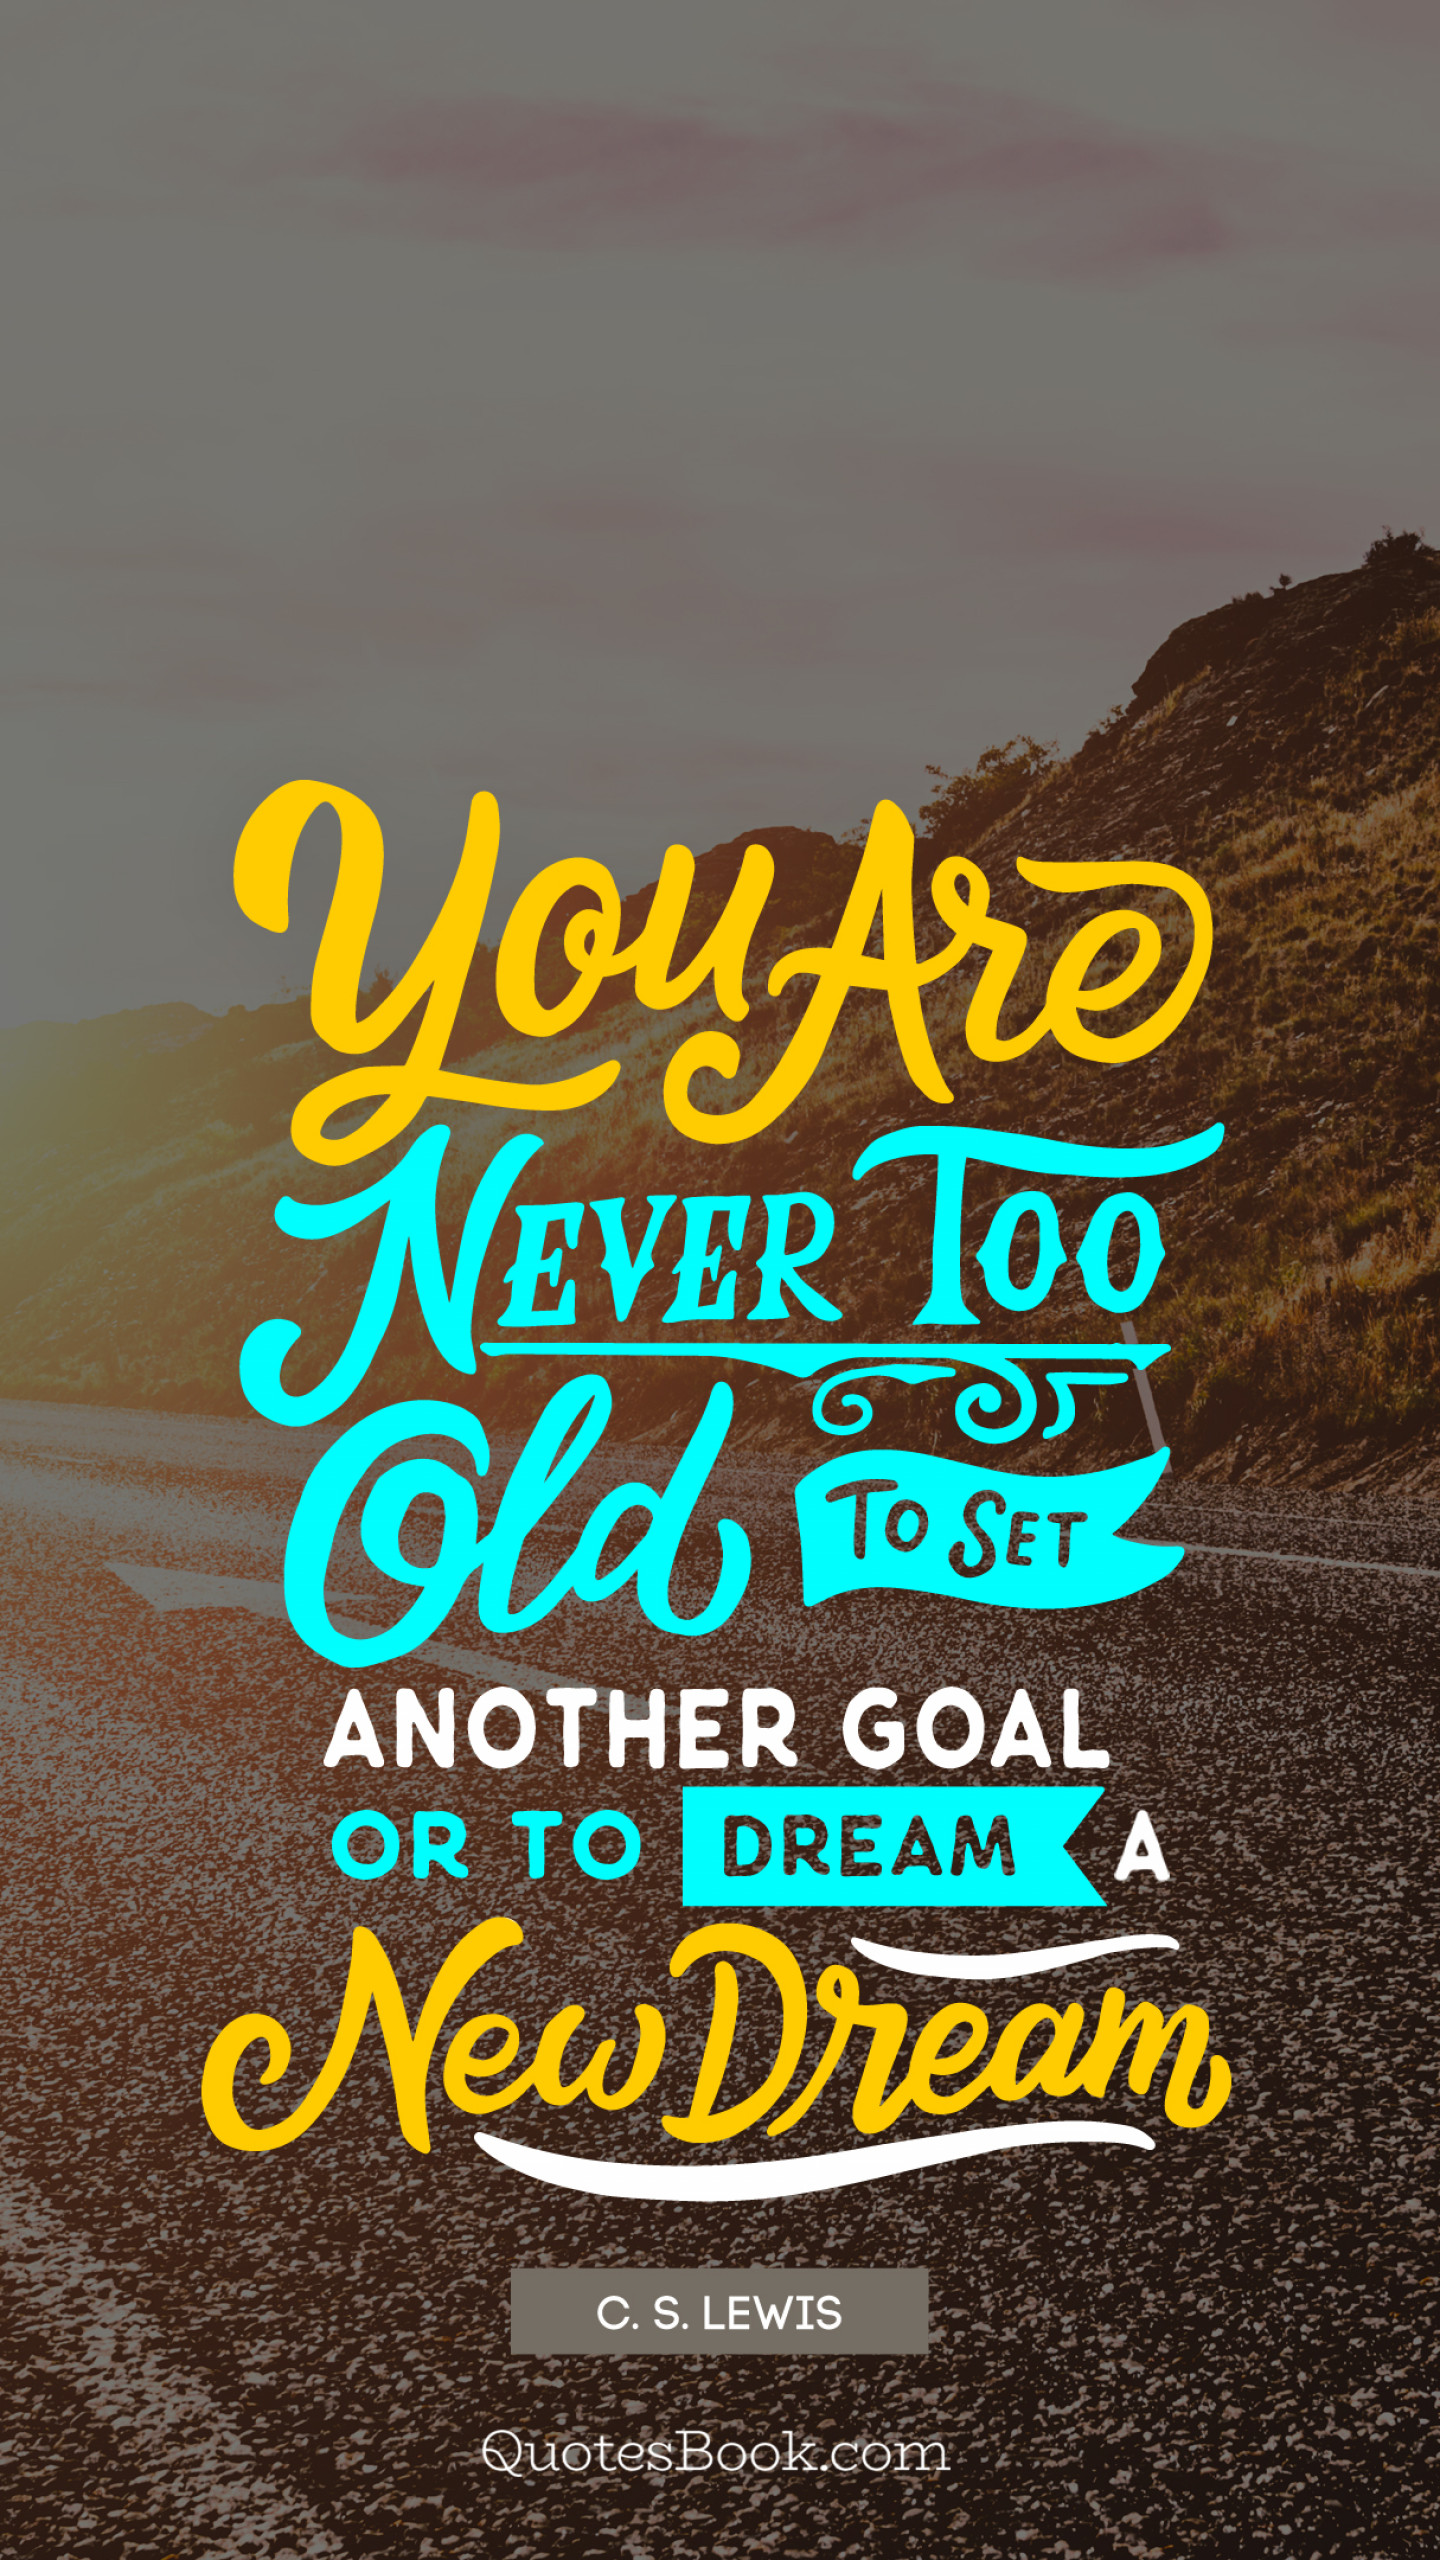 You are never too old to set another goal or to dream a new dream